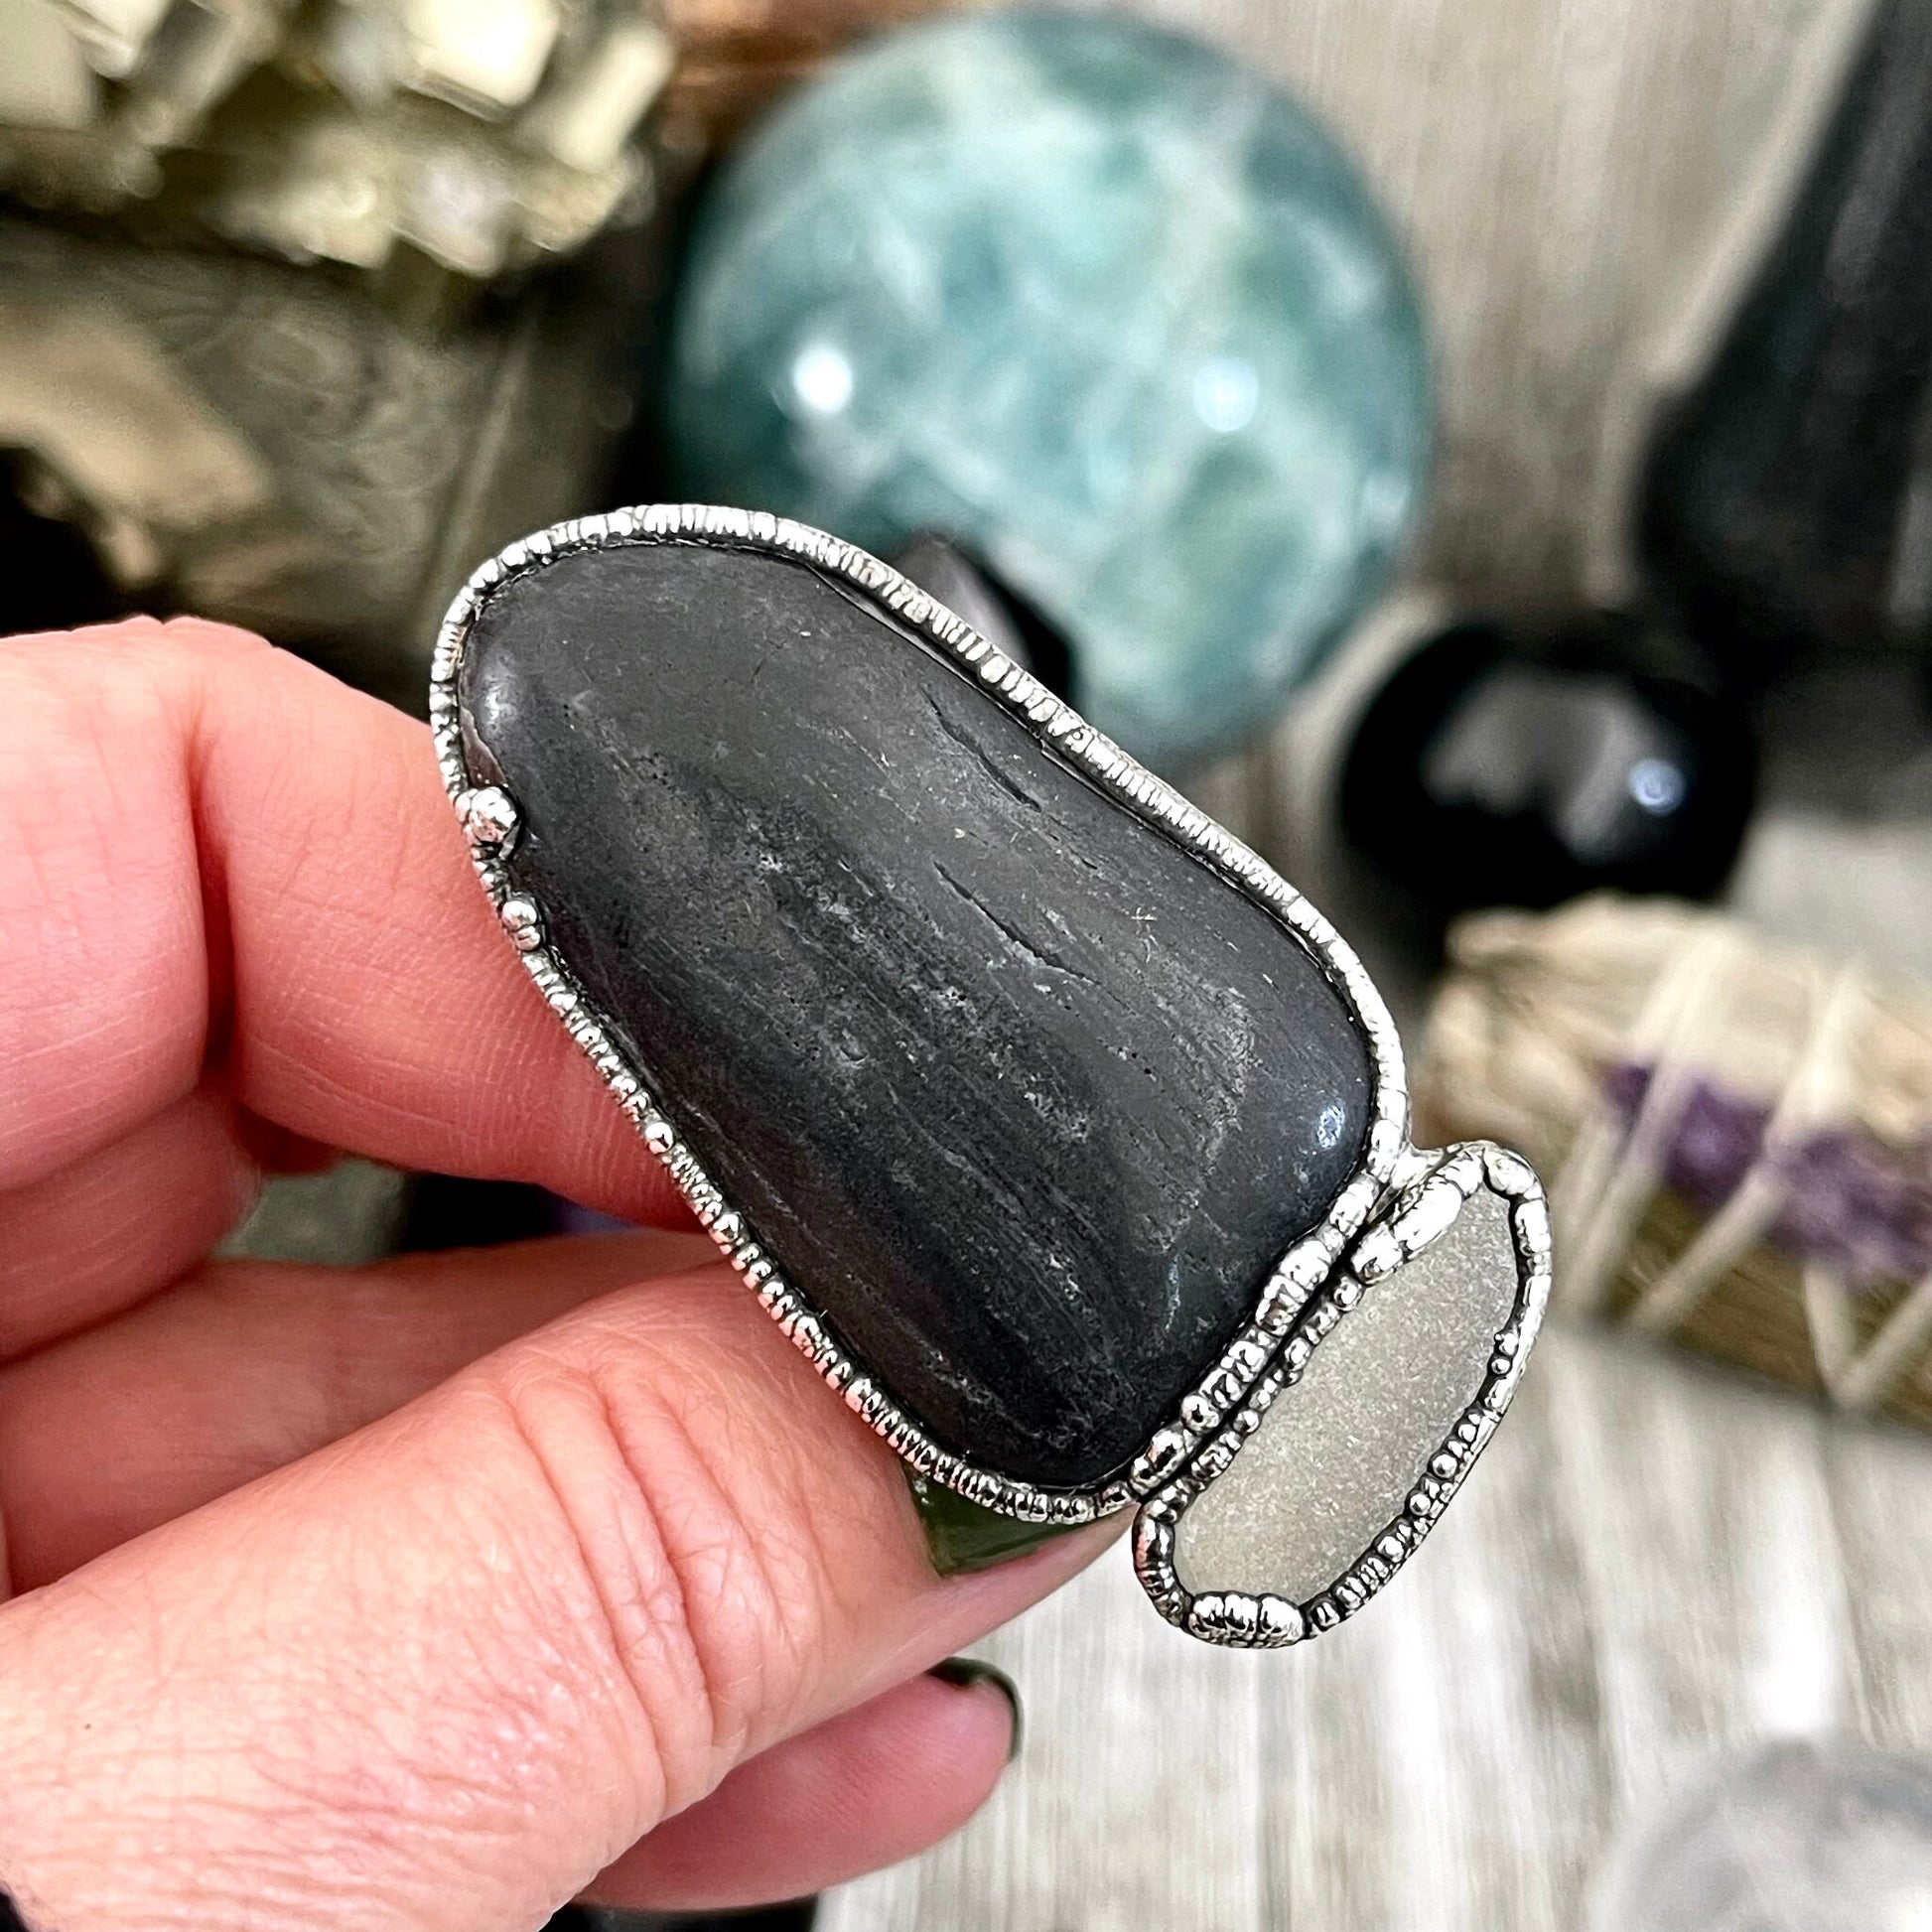 Size 10.5 Two Stone Ring-River Rock Clear Quartz Crystal Ring Fine Silver / Foxlark Collection - One of a Kind / Statement Jewelry